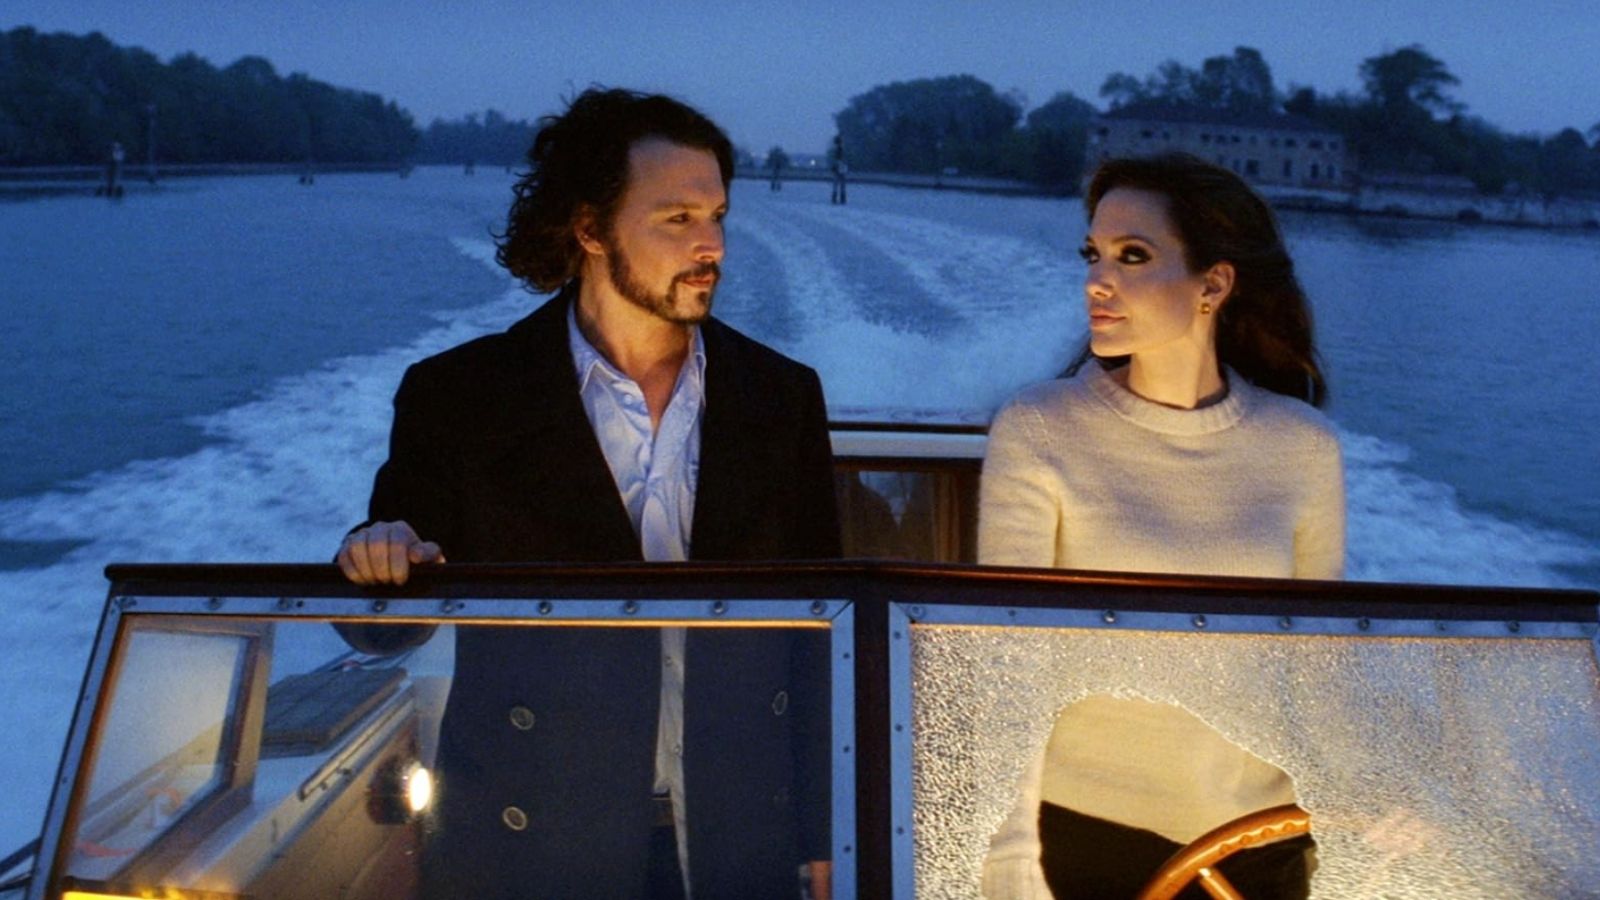 <p><span> Depp and Jolie were electric together in “The Tourist,” creating an atmosphere of mystery and allure with just a shared look. Their chemistry was undeniable, and they owned their roles effortlessly. But behind this starry veil lay a plot that felt all too familiar and lacked the twists and turns needed to keep it truly intriguing.</span></p>